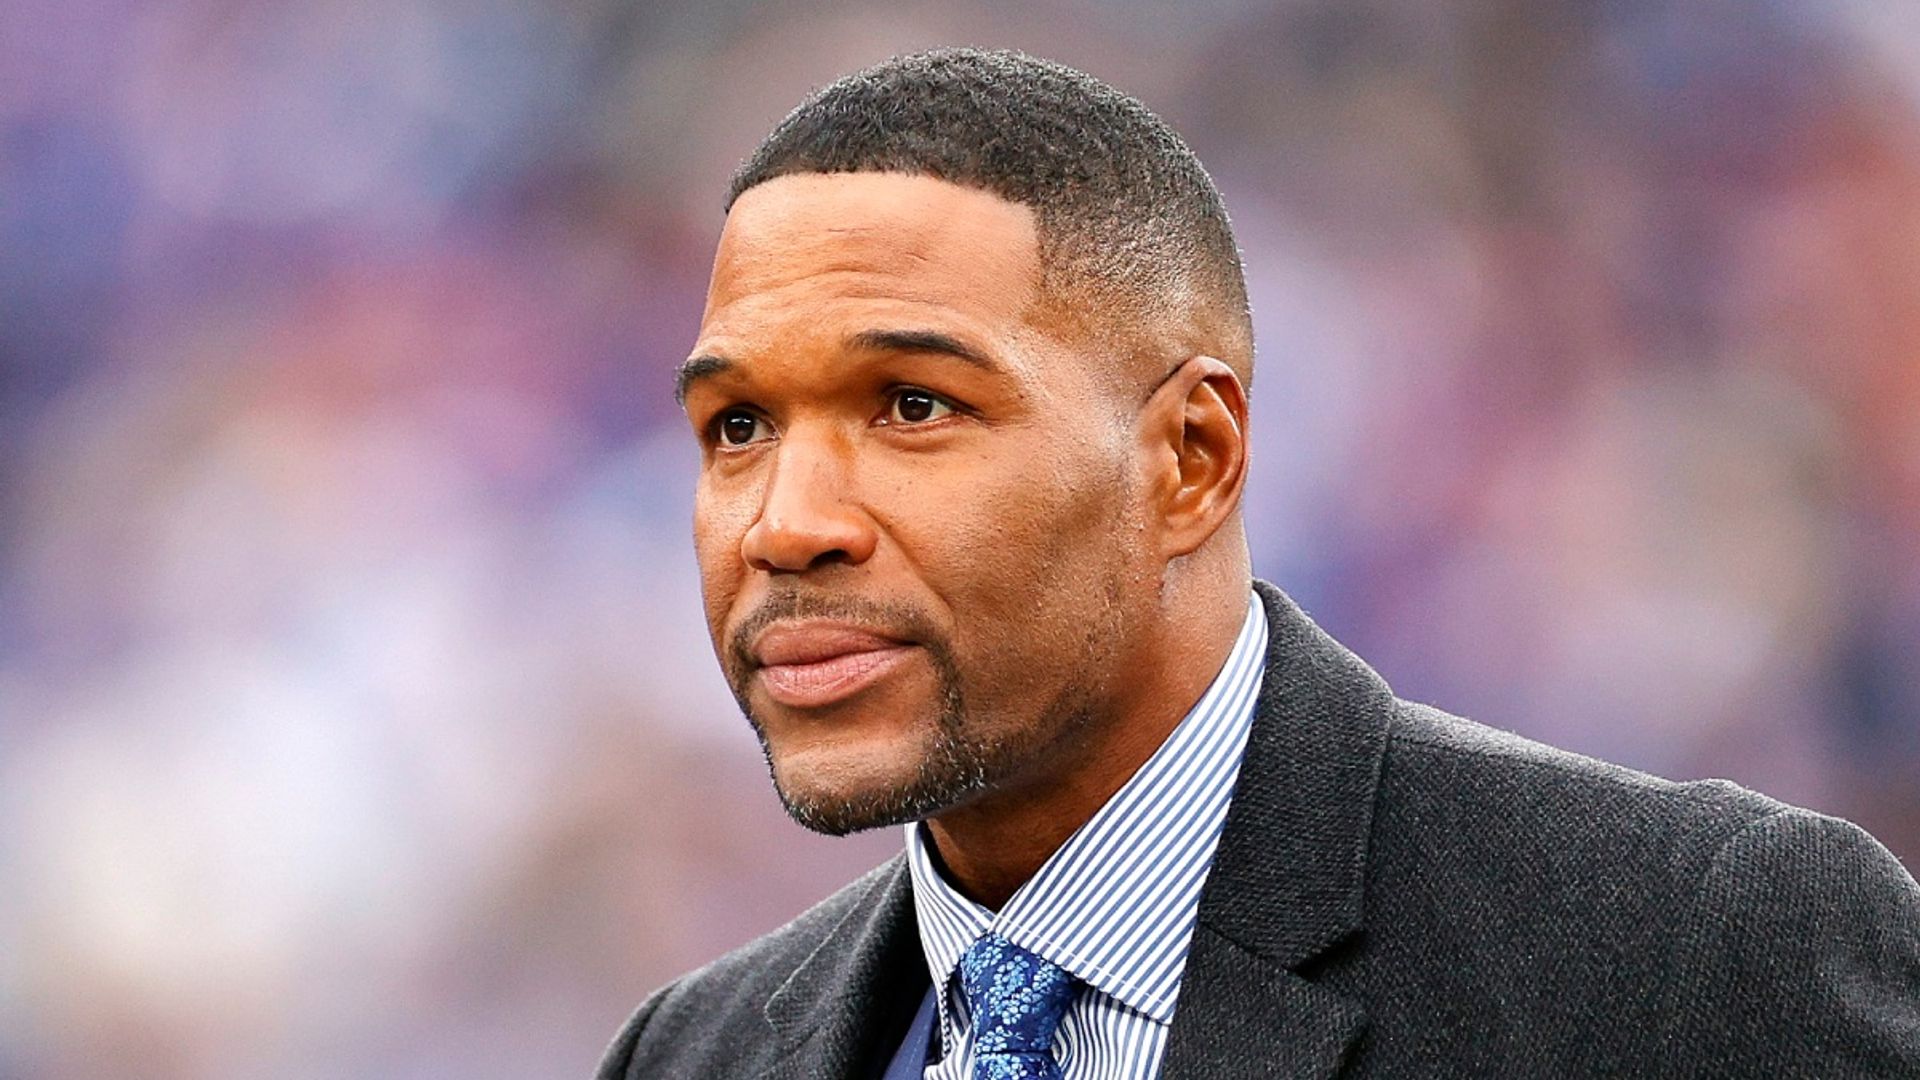 Gmas Michael Strahan Missing From Show Real Reason Revealed For Absence Hello 